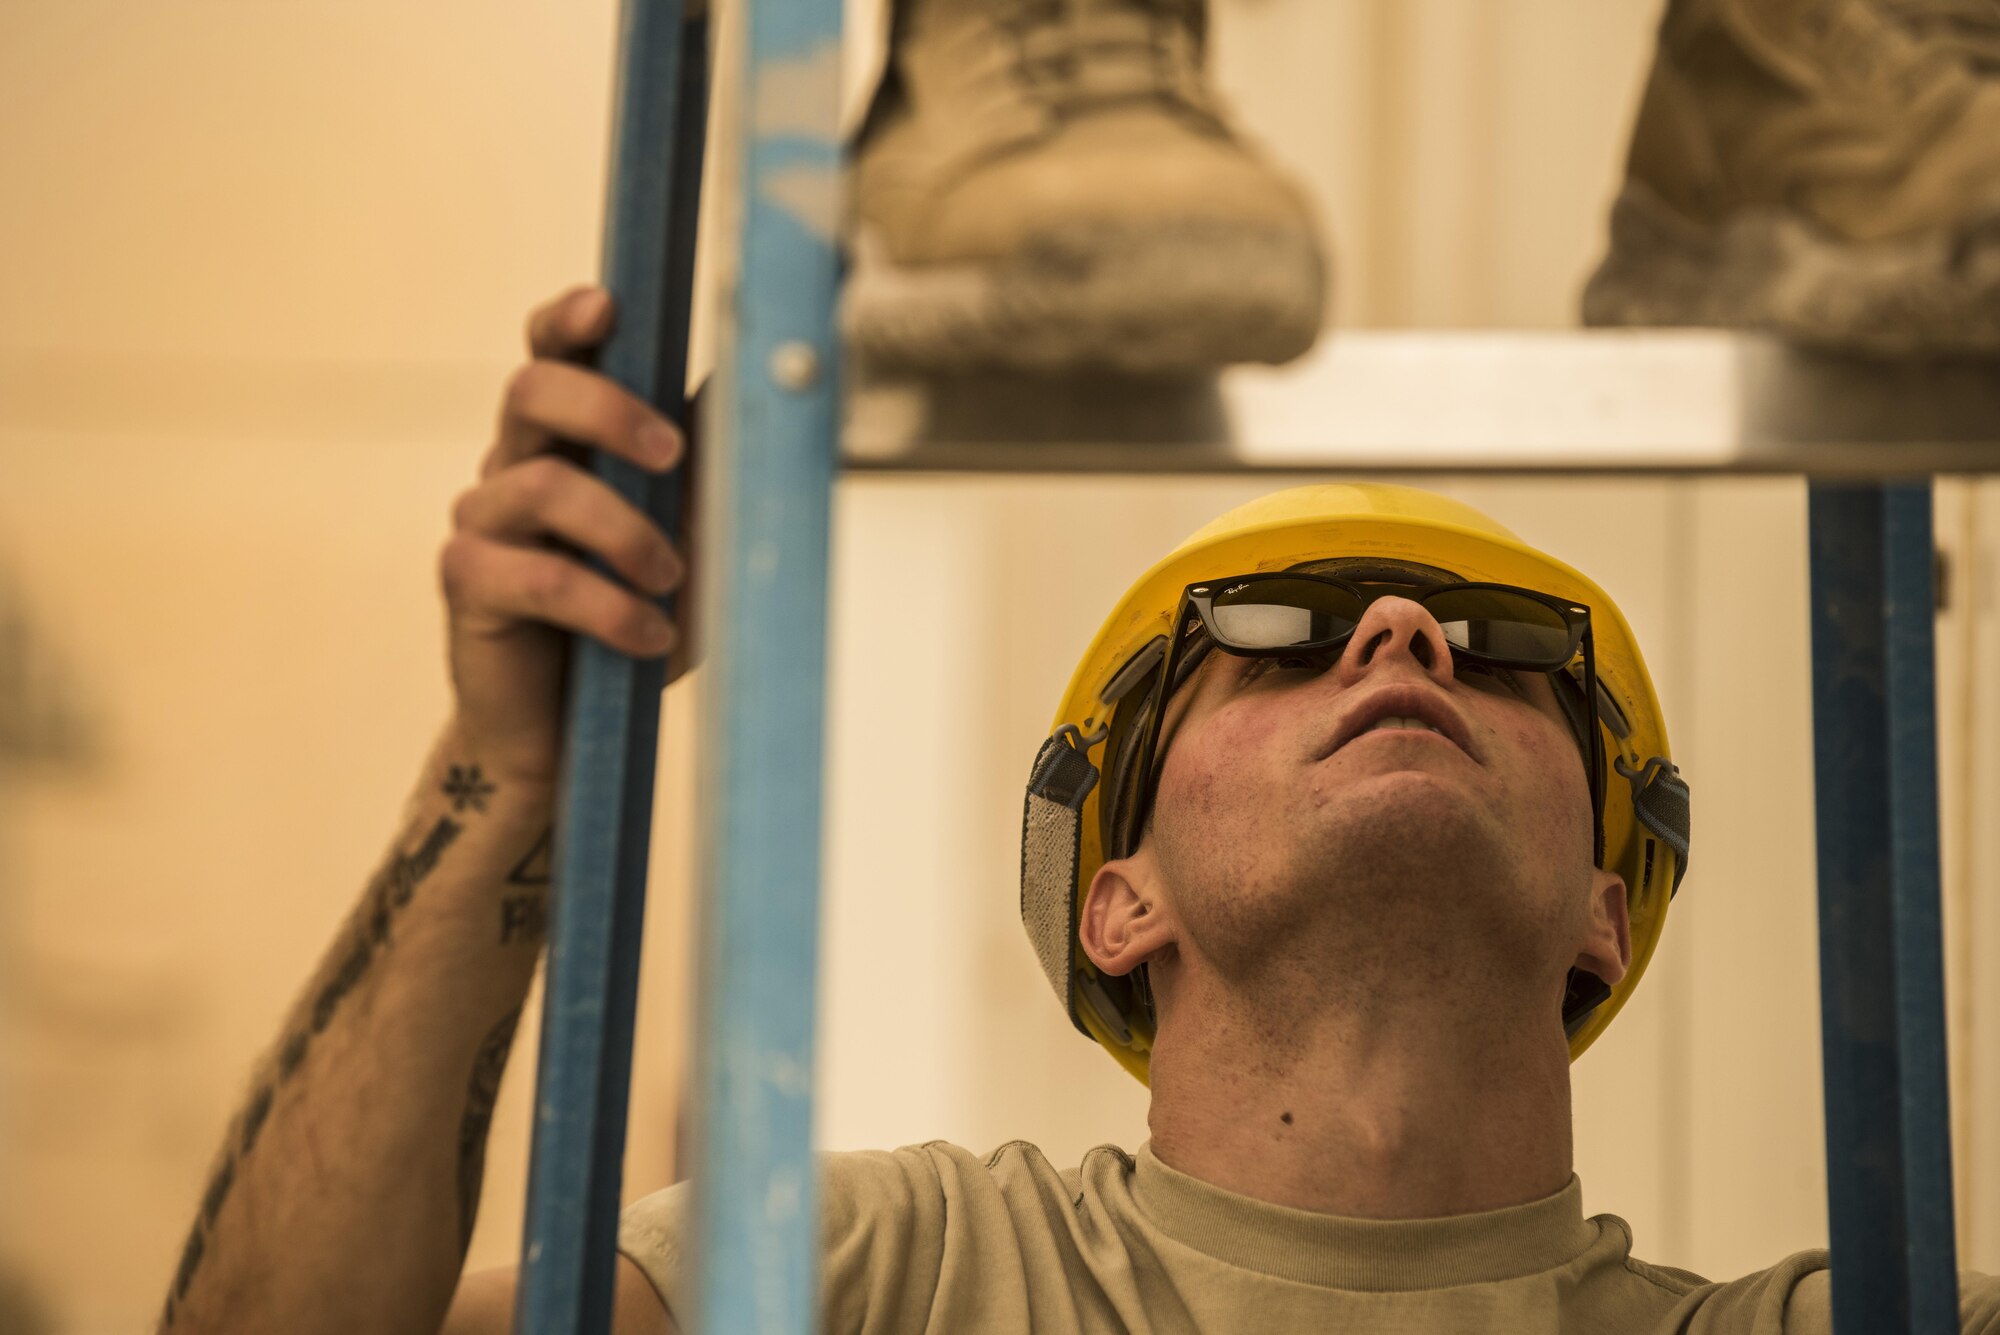 SrA Jacob Ferreira, assigned to the 332nd Expeditionary Communications Squadron, secures a ladder for a teammate during a base-wide wireless internet improvement project Nov. 13, 2017 in Southwest Asia. Installing new infrastructure of any kind in austere environments requires a high level of focus on safety and attention to detail. (U.S. Air Force by Senior Airman Joshua Kleinholz